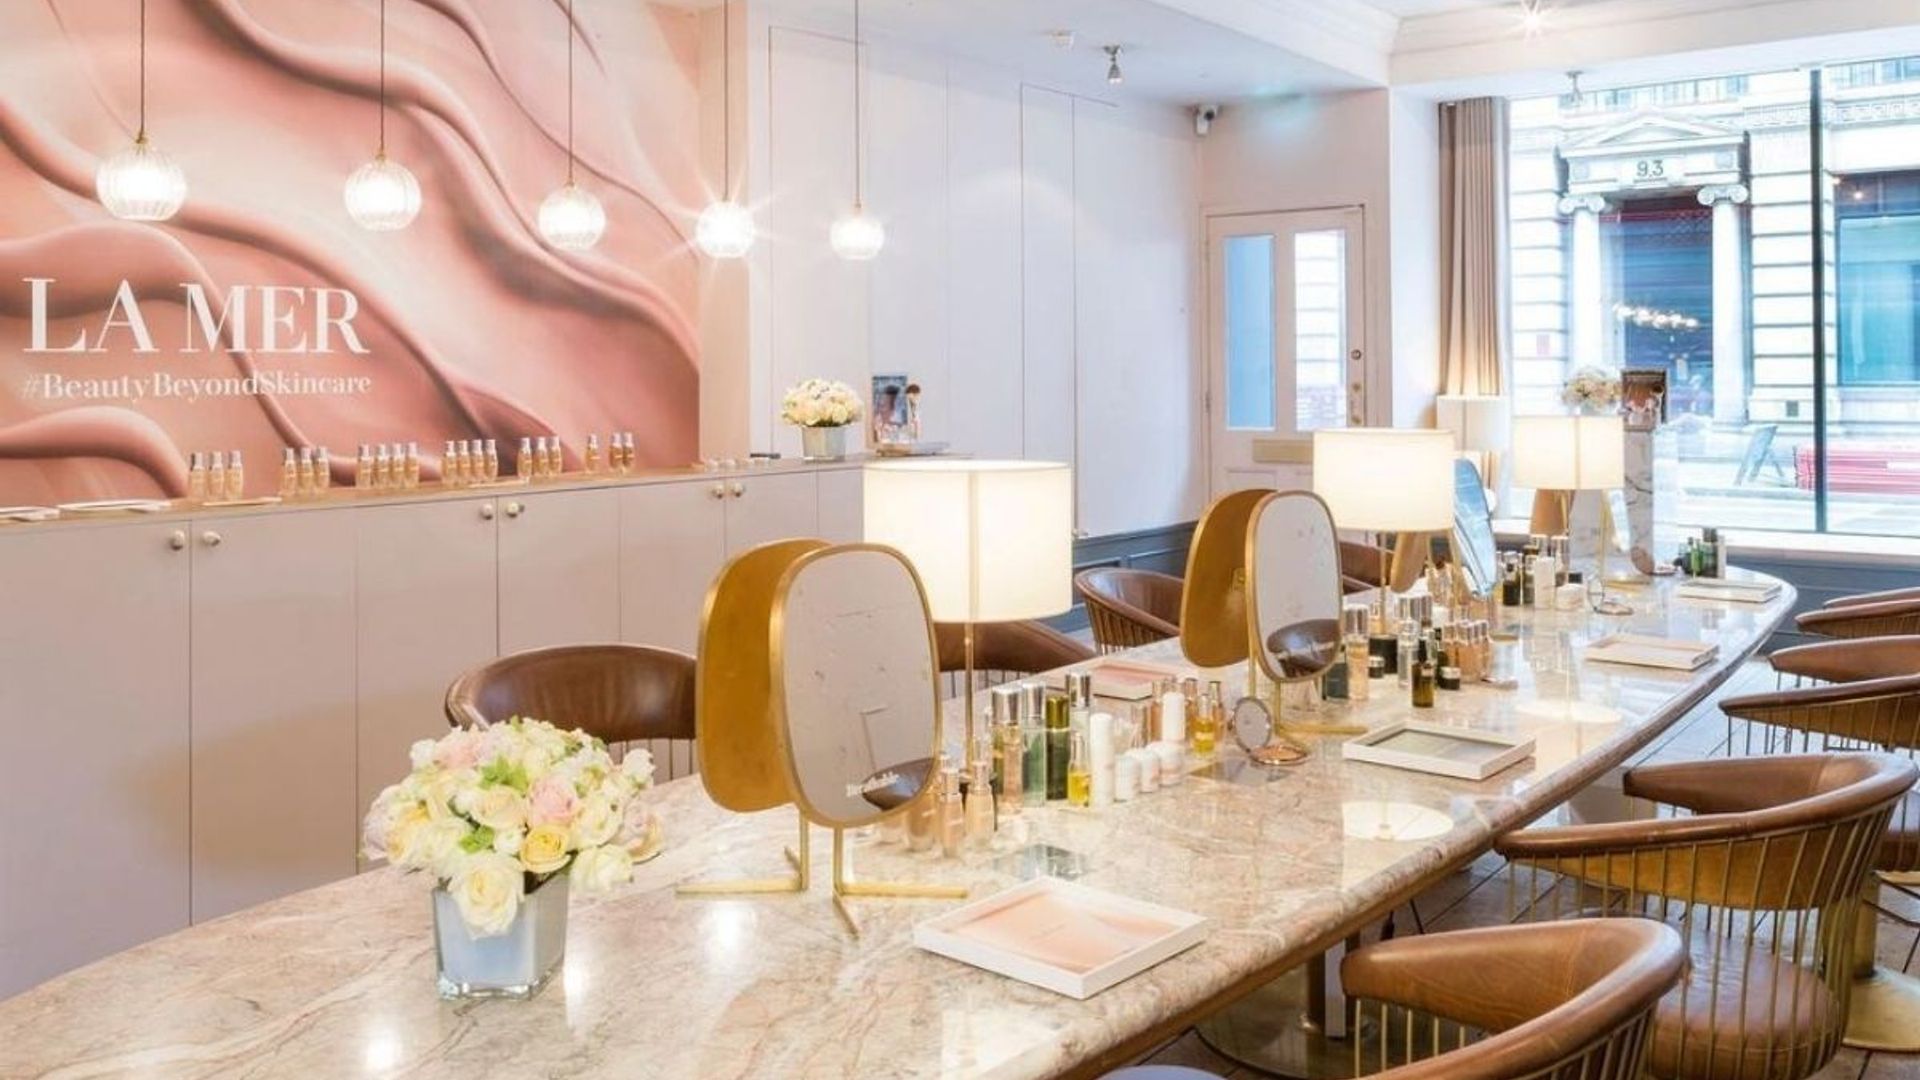 The best blow dry bars in London